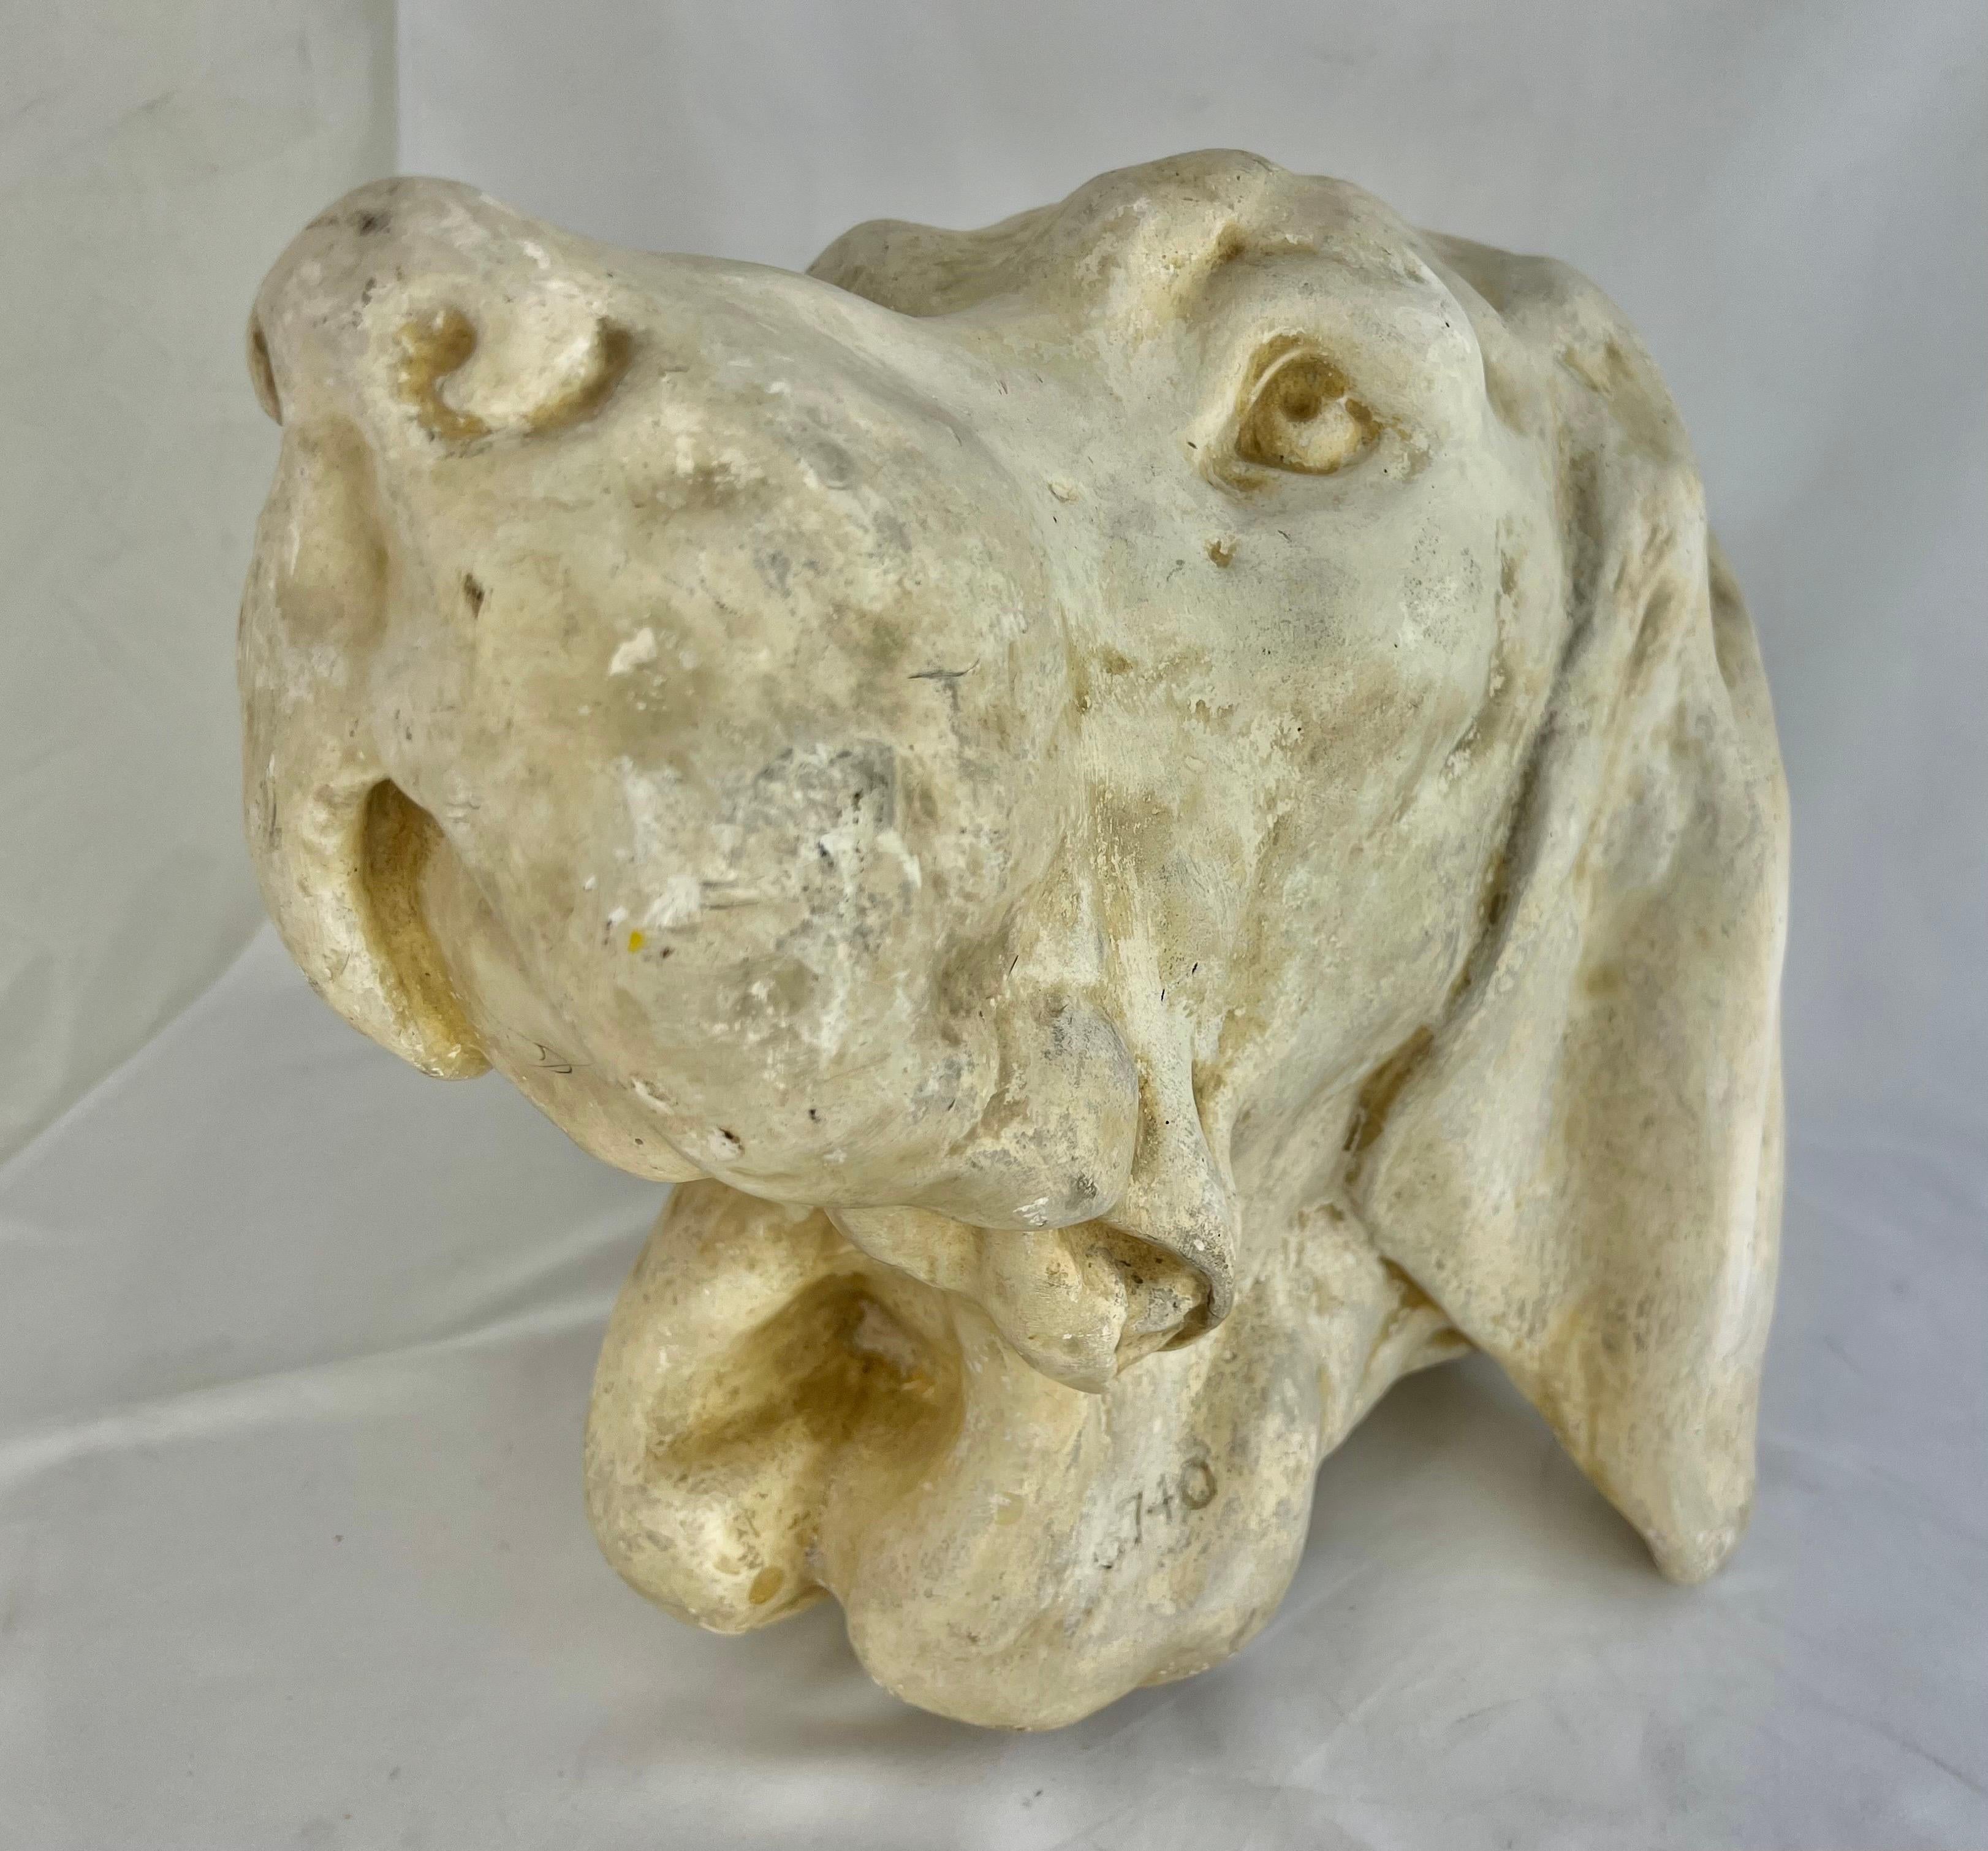 Early 20th Century Oringinal Casting of a Pointer, Early 1900s by P.P. Caproni Bros of Boston